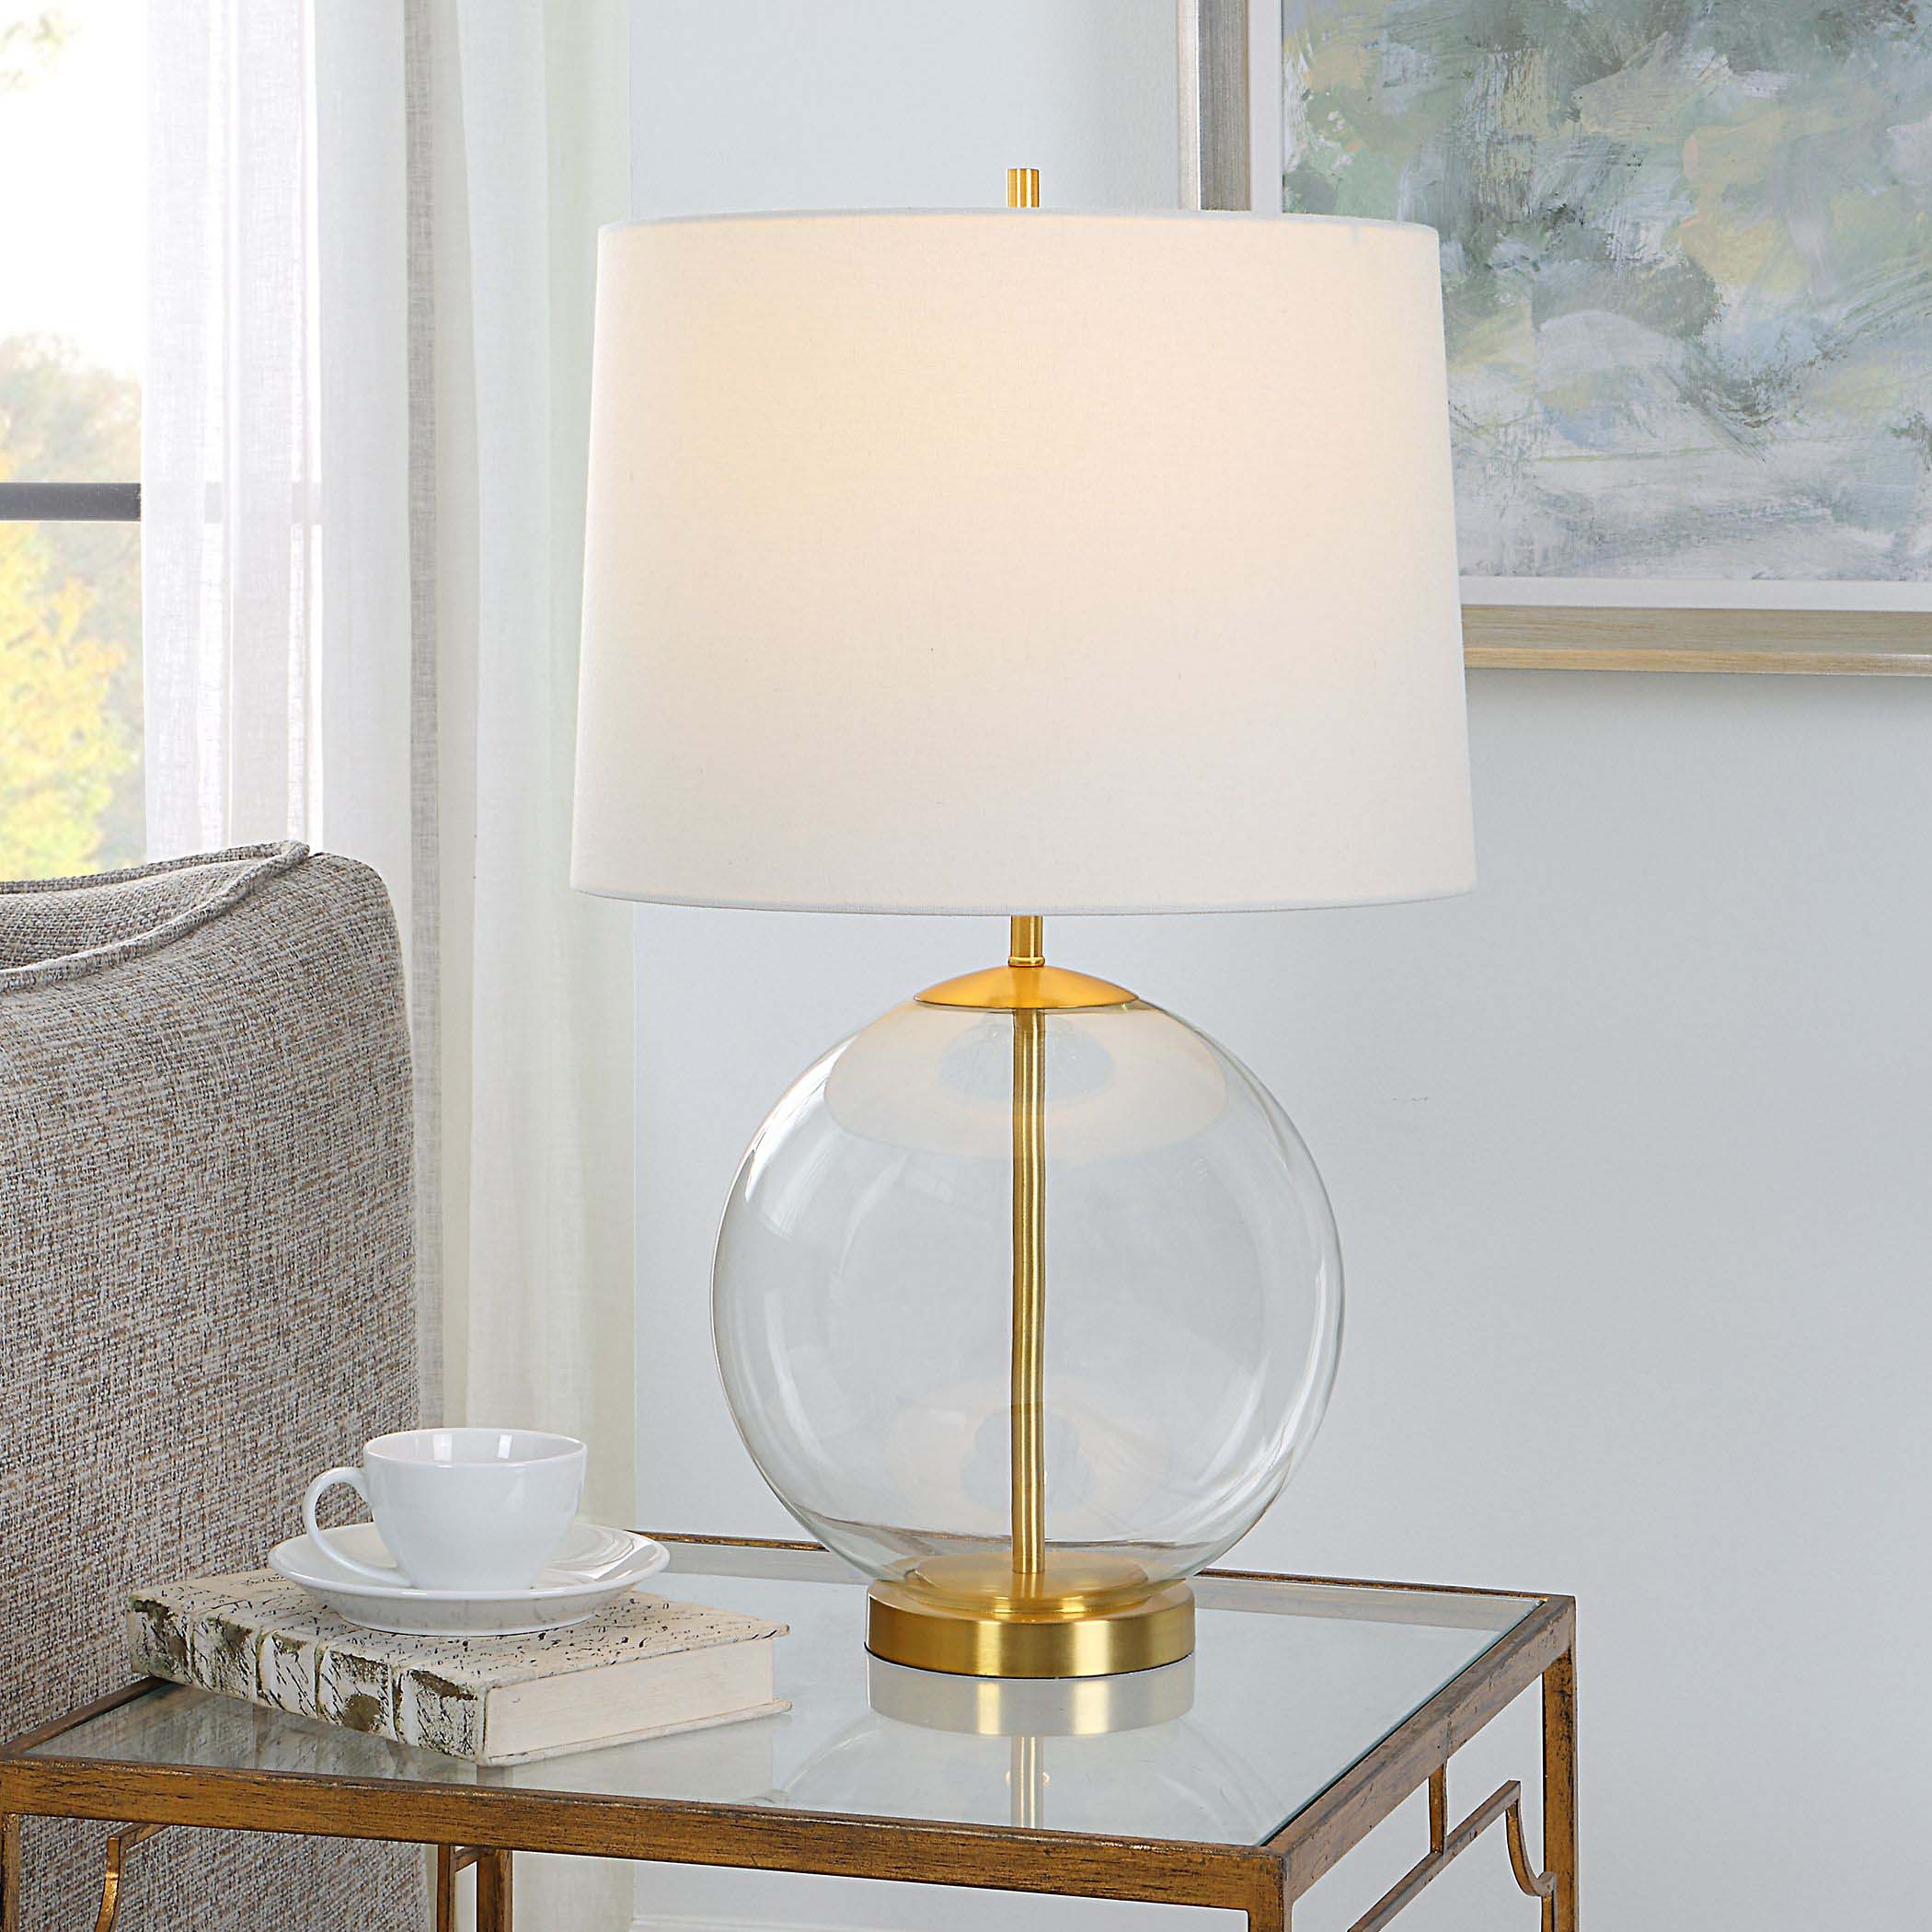 Decor Market Table Lamp Clear Glass Body With Gold Accents